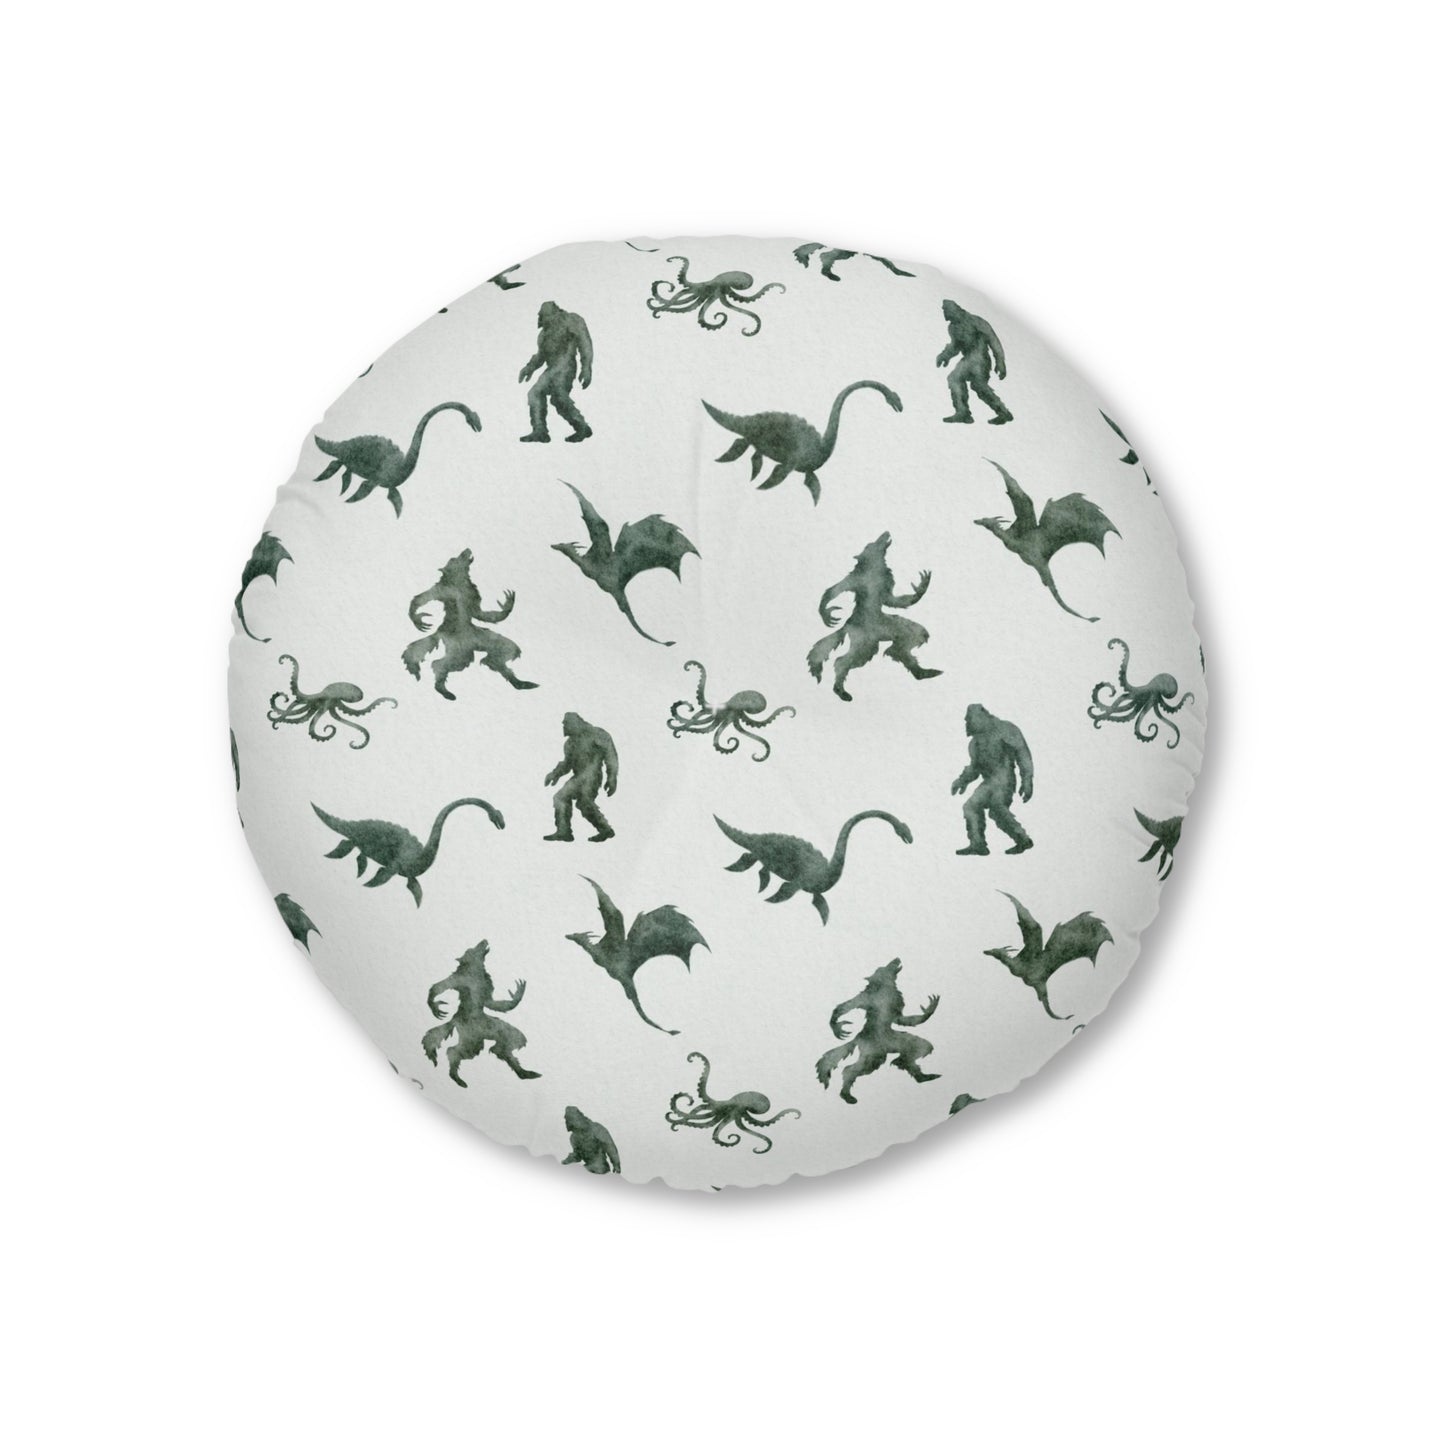 Mythical Creature Tufted Floor Pillow, Round